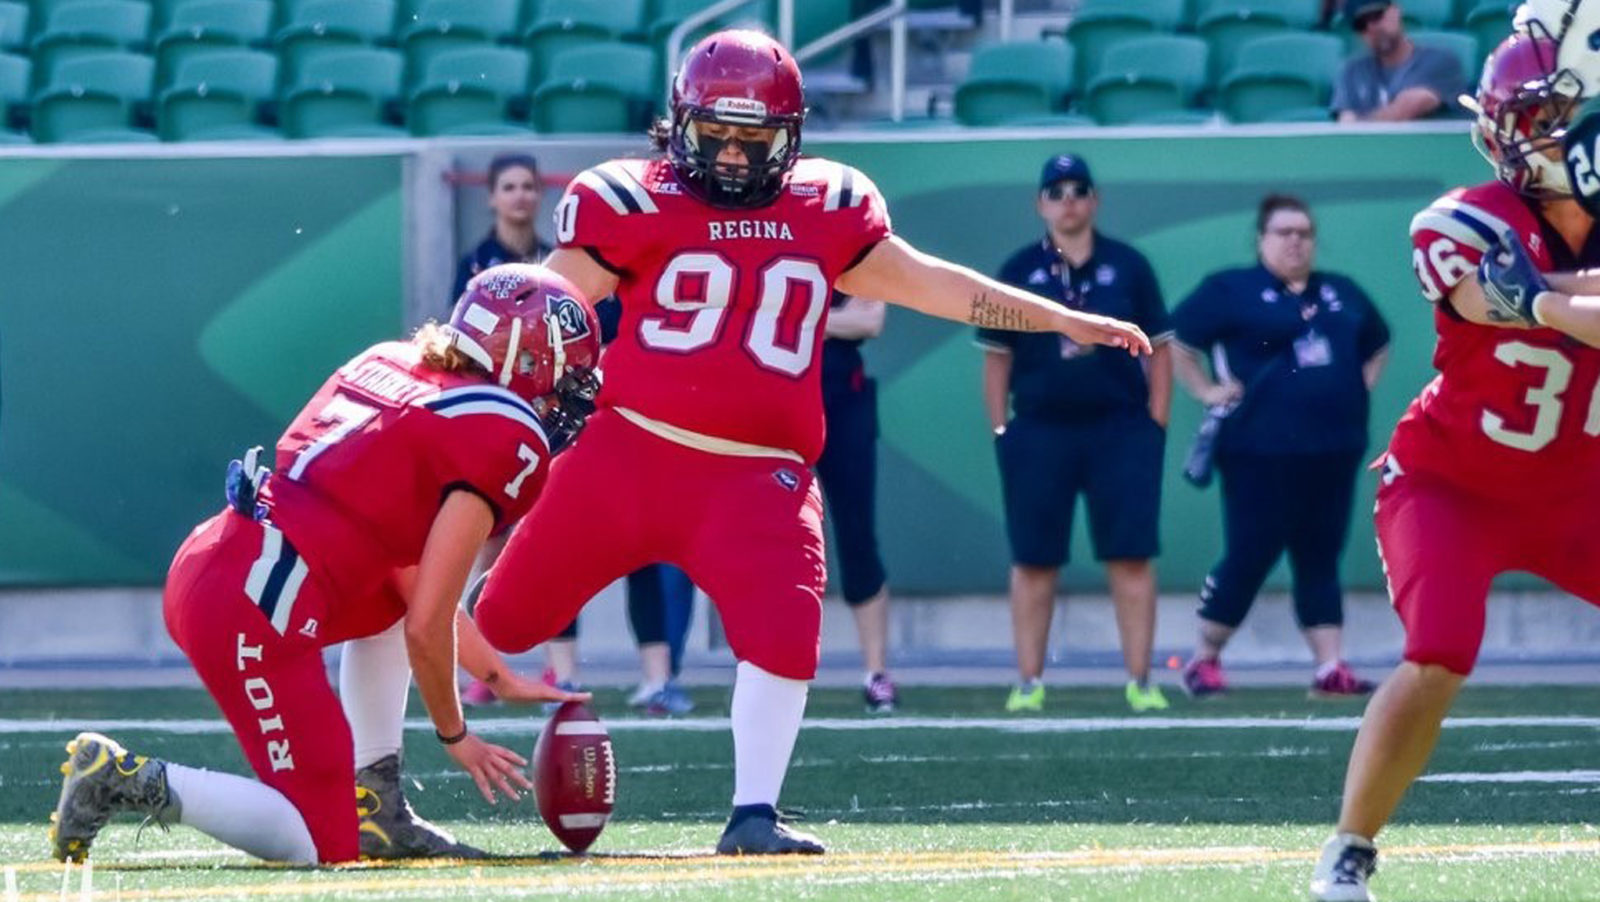 O'Leary: Women's tackle football aiming to level the playing field